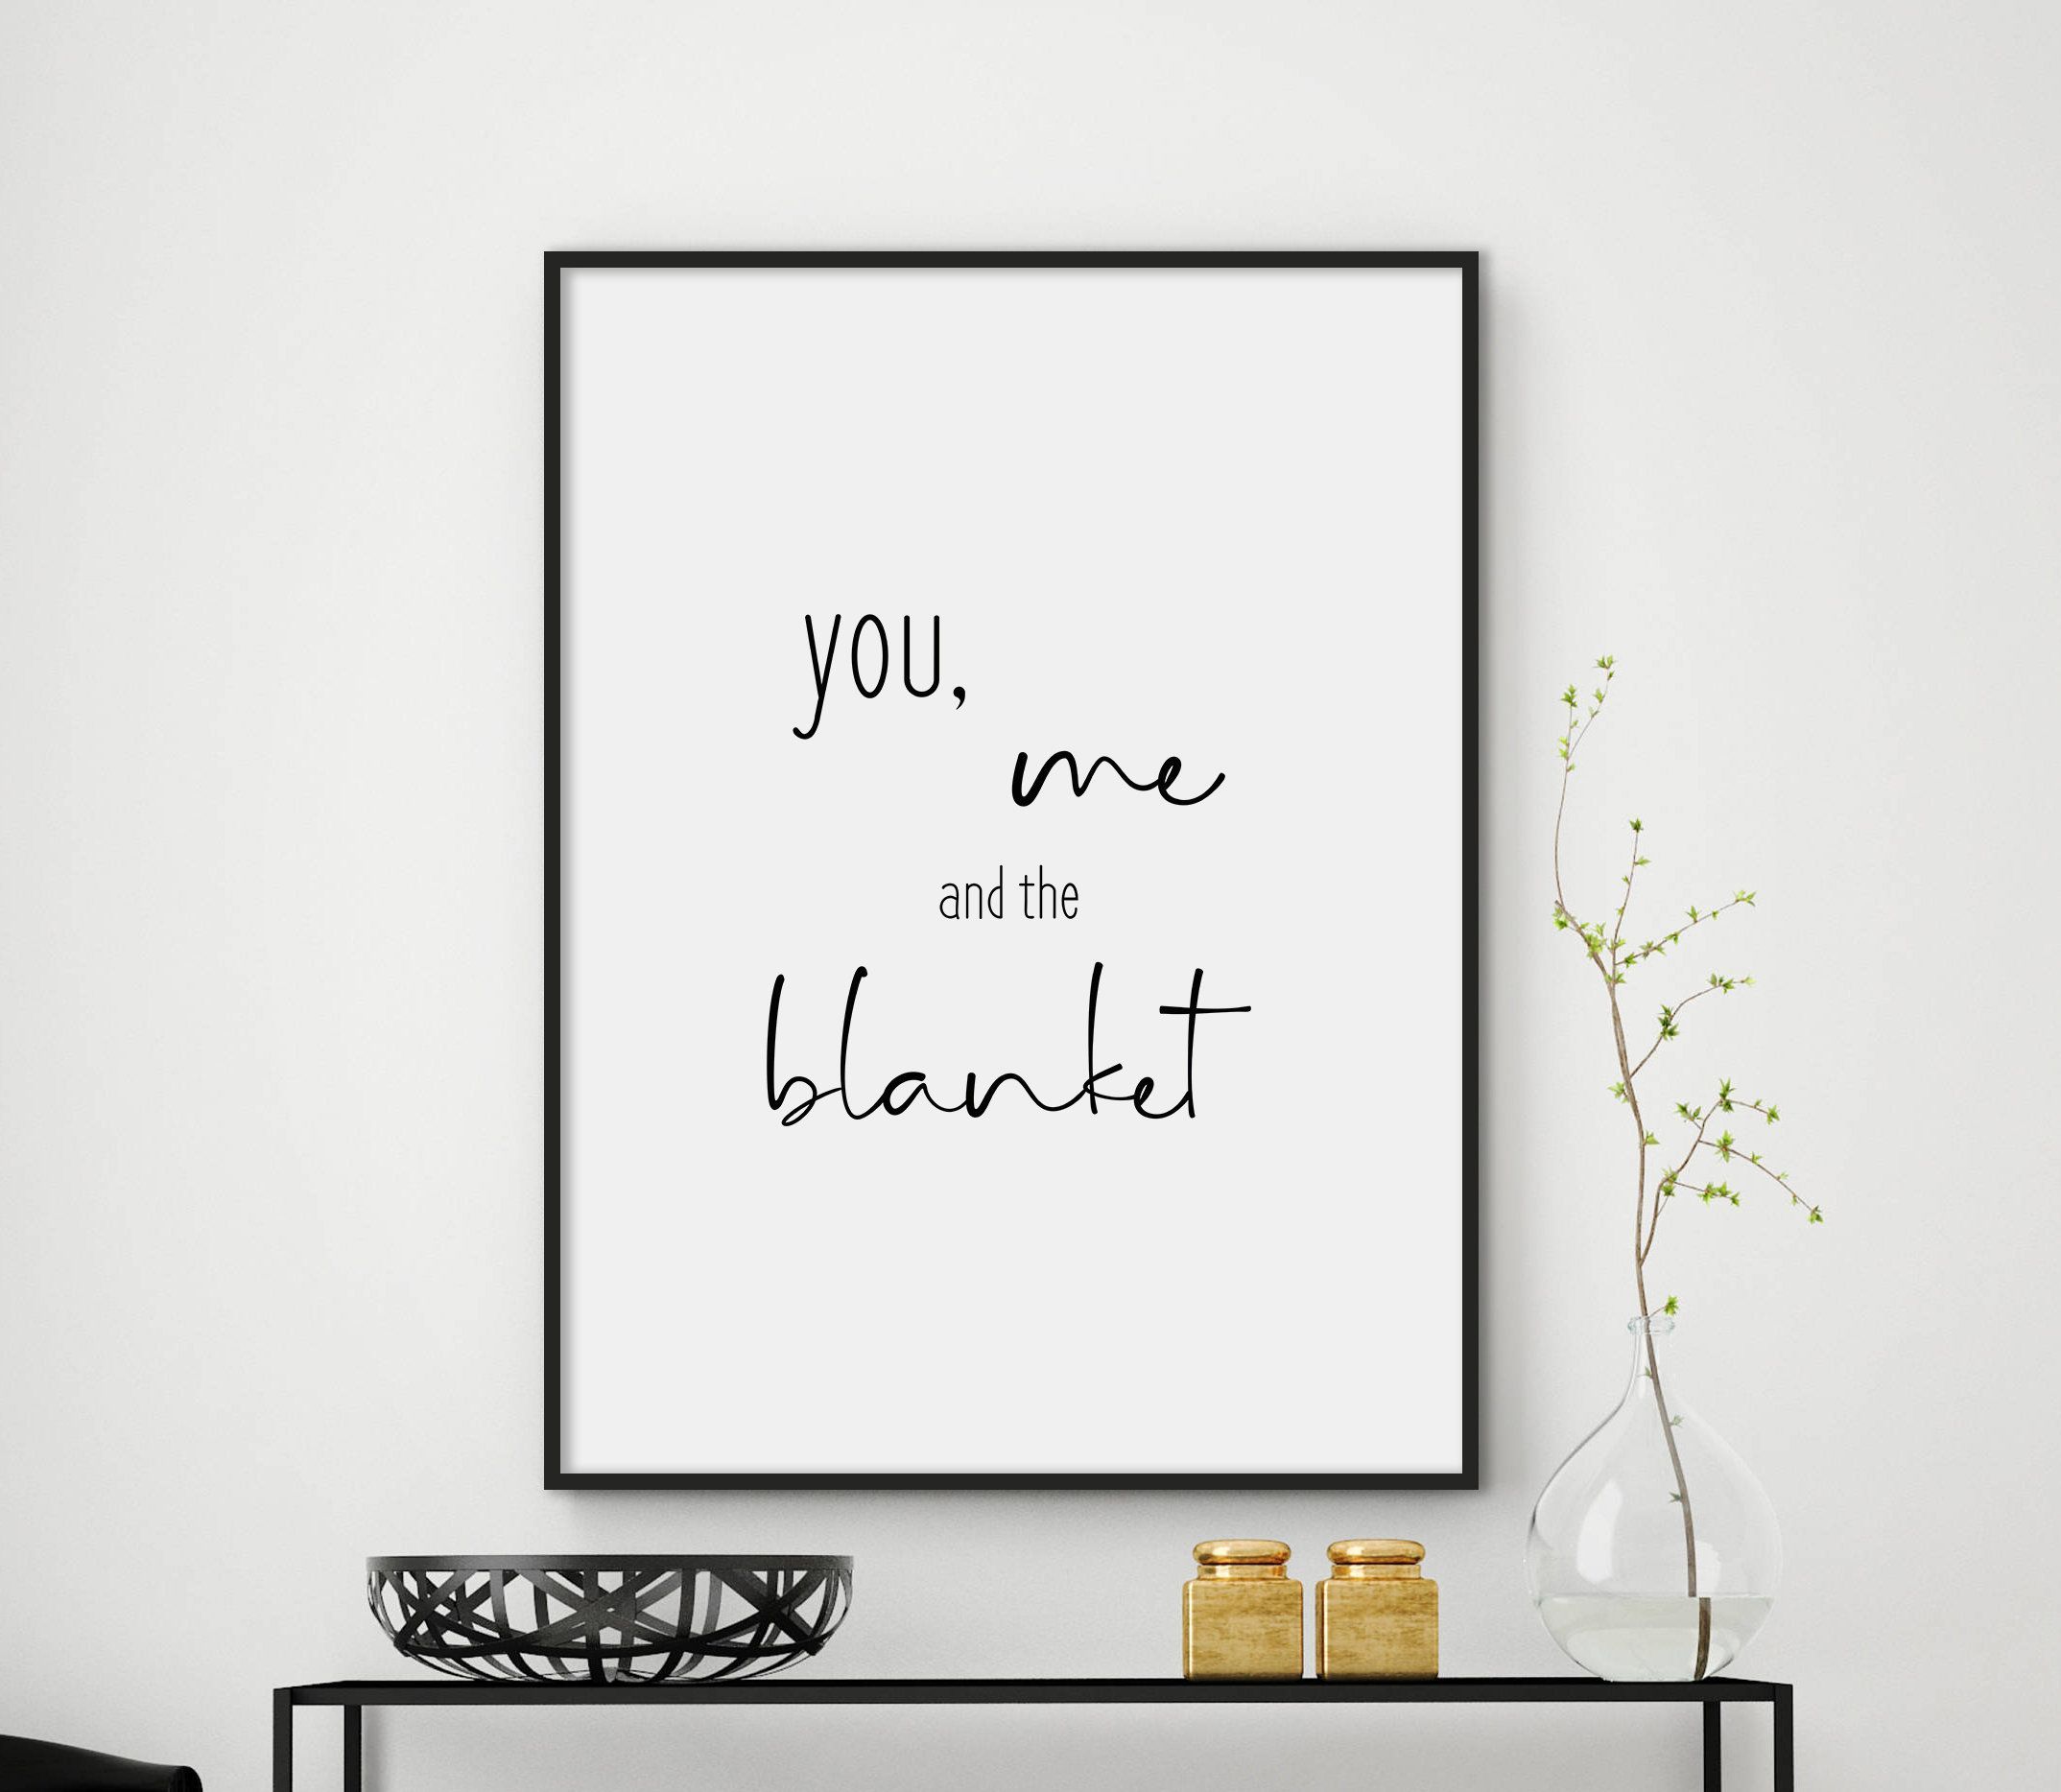 Bedroom Posters Funny Bedroom Wall Decor Funny Quote – Etsy | Funny Wall  Art Quotes, Funny Bedroom, Funny Quote Prints In Most Popular Funny Quote Wall Art (View 8 of 20)